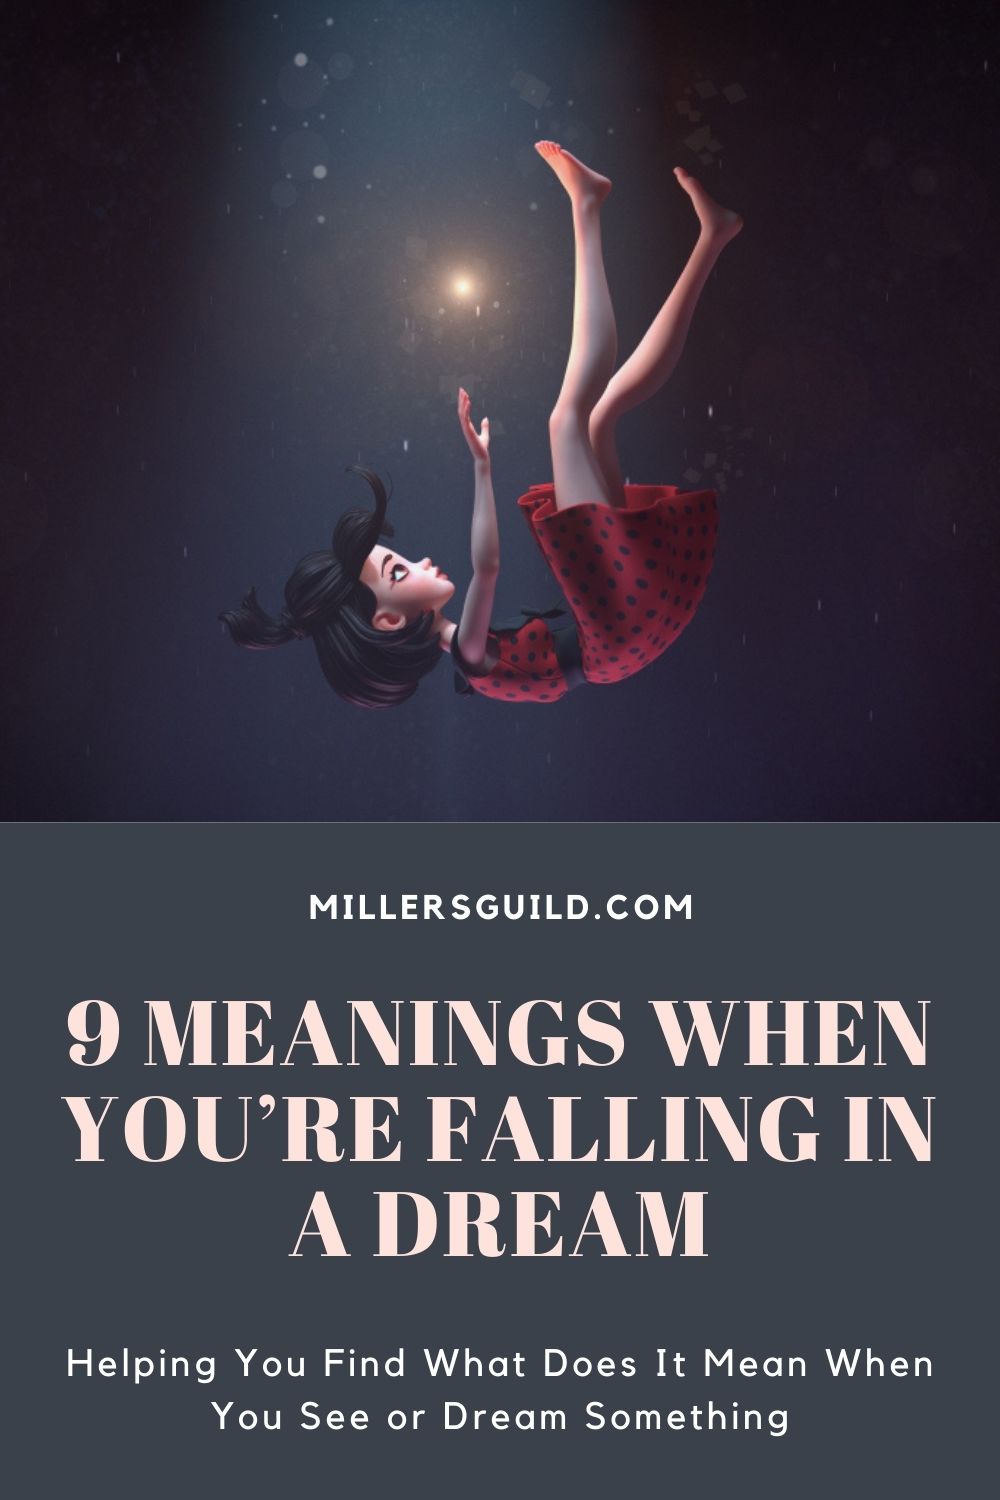 9 Meanings When Youre Falling In a Dream